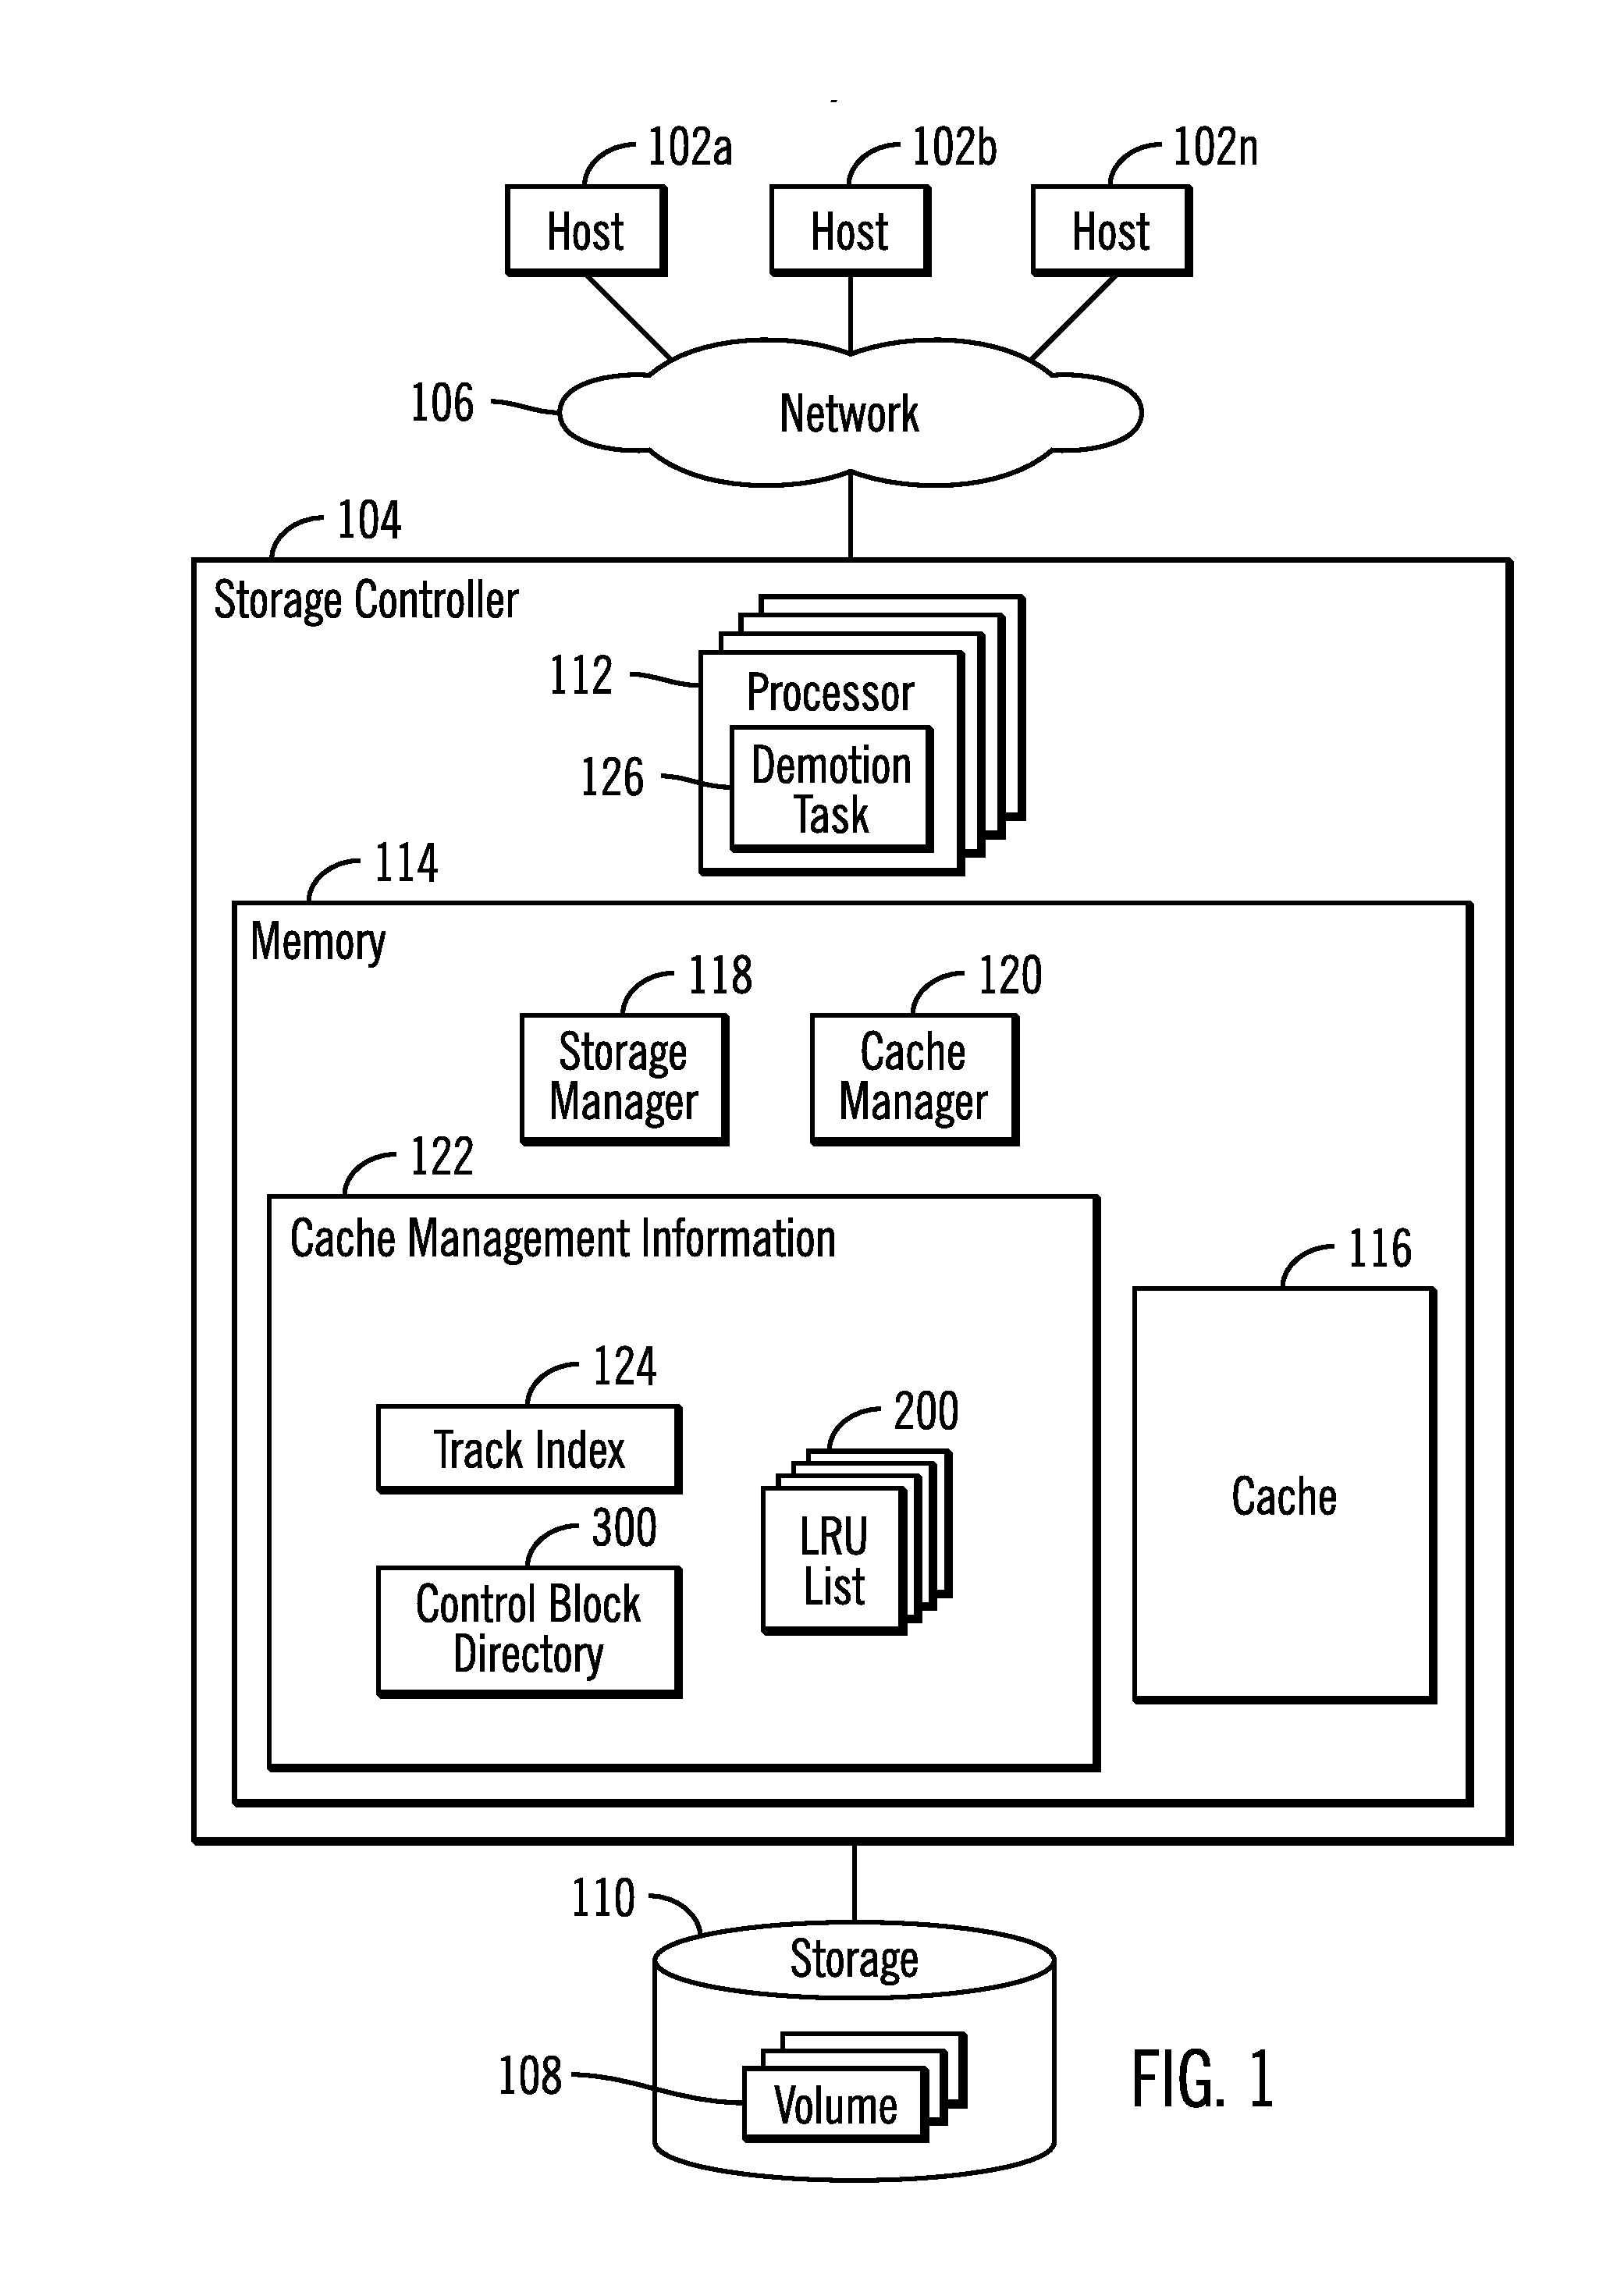 Using cache lists for processors to determine tracks to demote from a cache